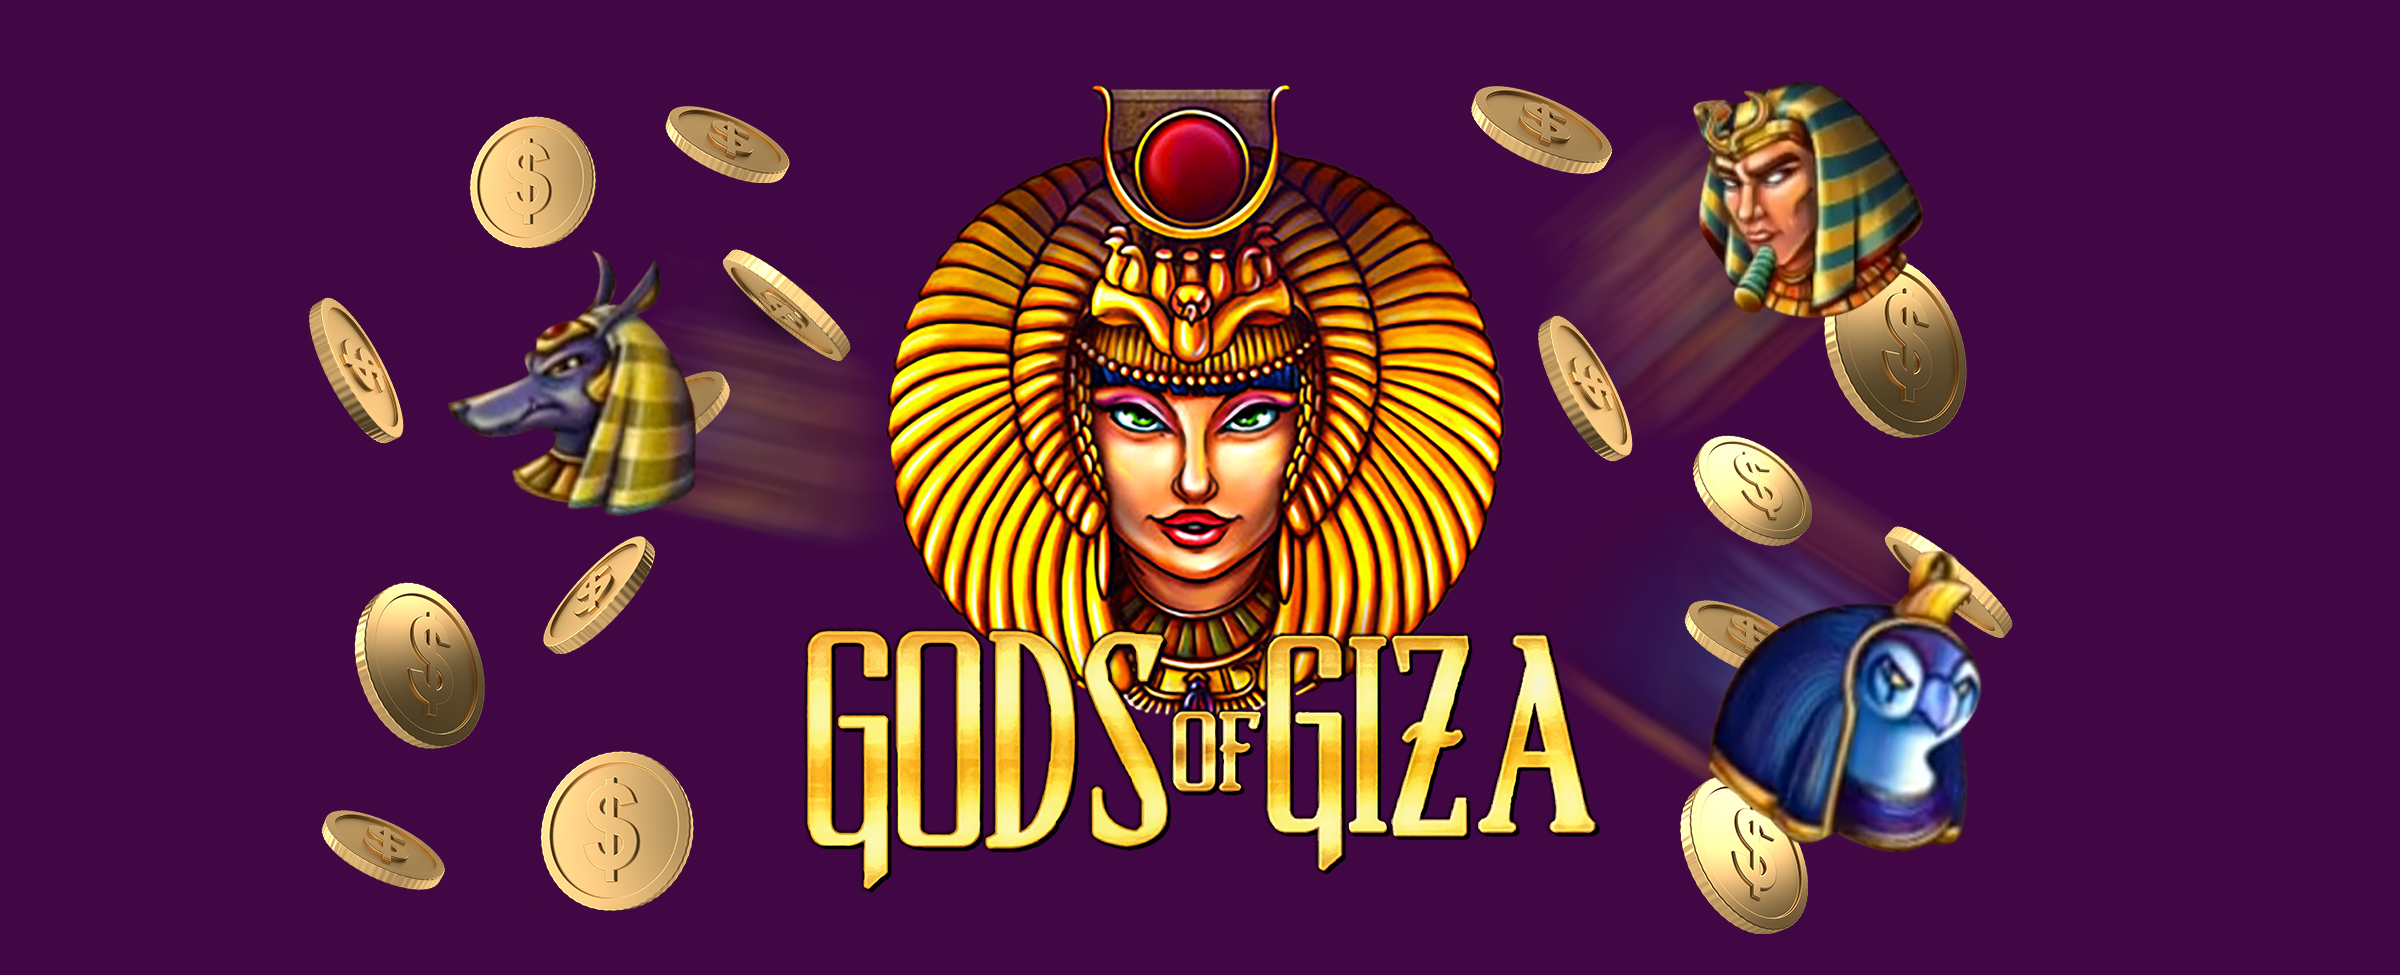 The logo from the Cafe Casino slot game, Gods of Giza Enhanced, is pictured against a purple background, surrounded by symbols from the slot and floating gold coins.